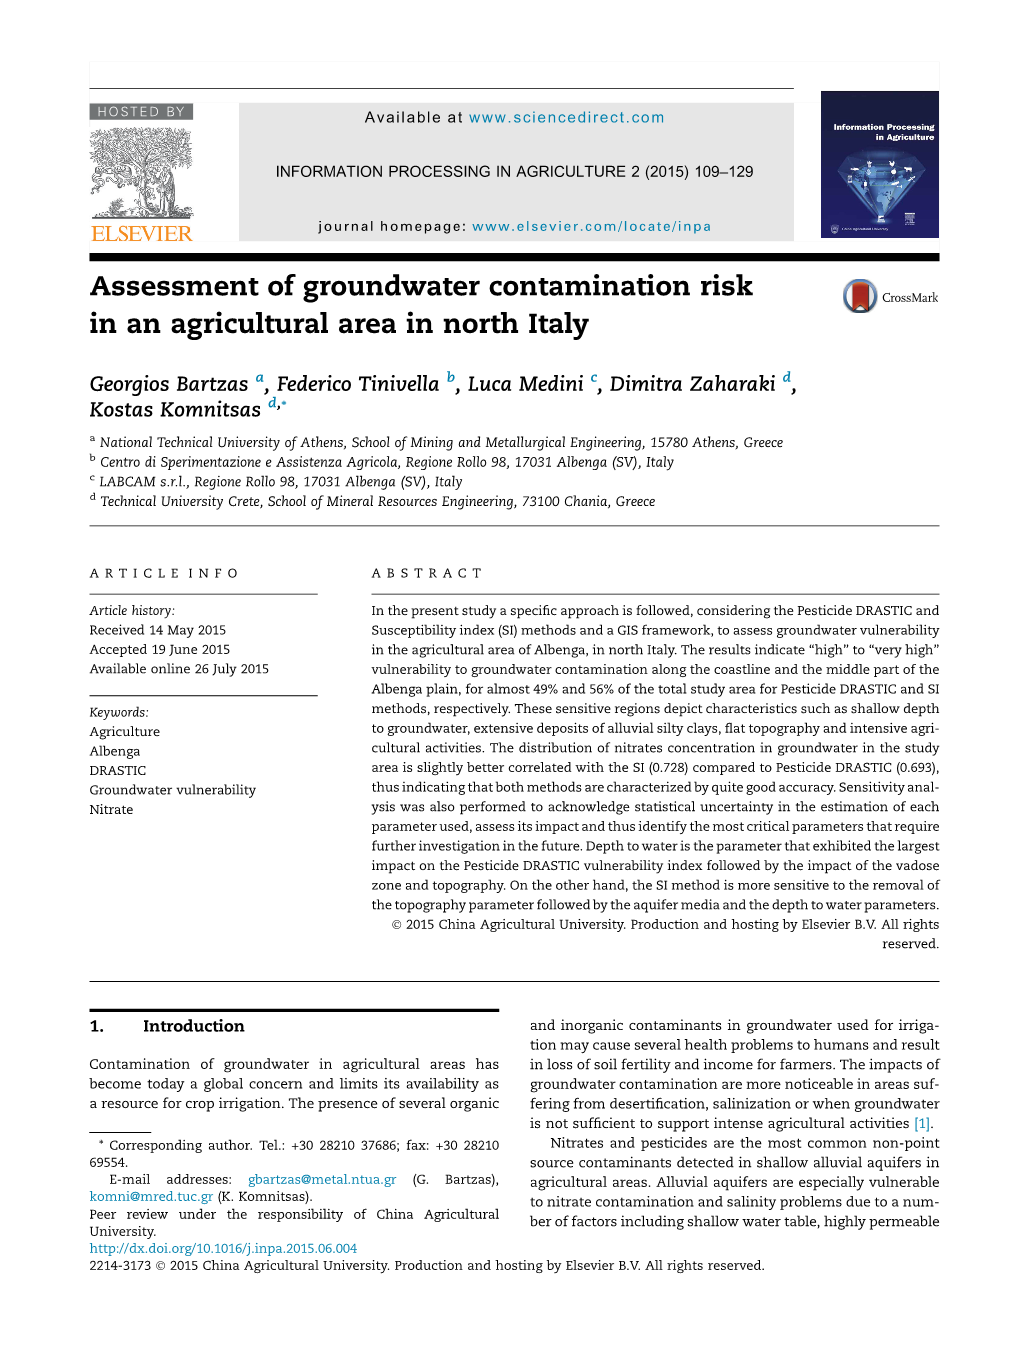 Assessment of Groundwater Contamination Risk in an Agricultural Area in North Italy